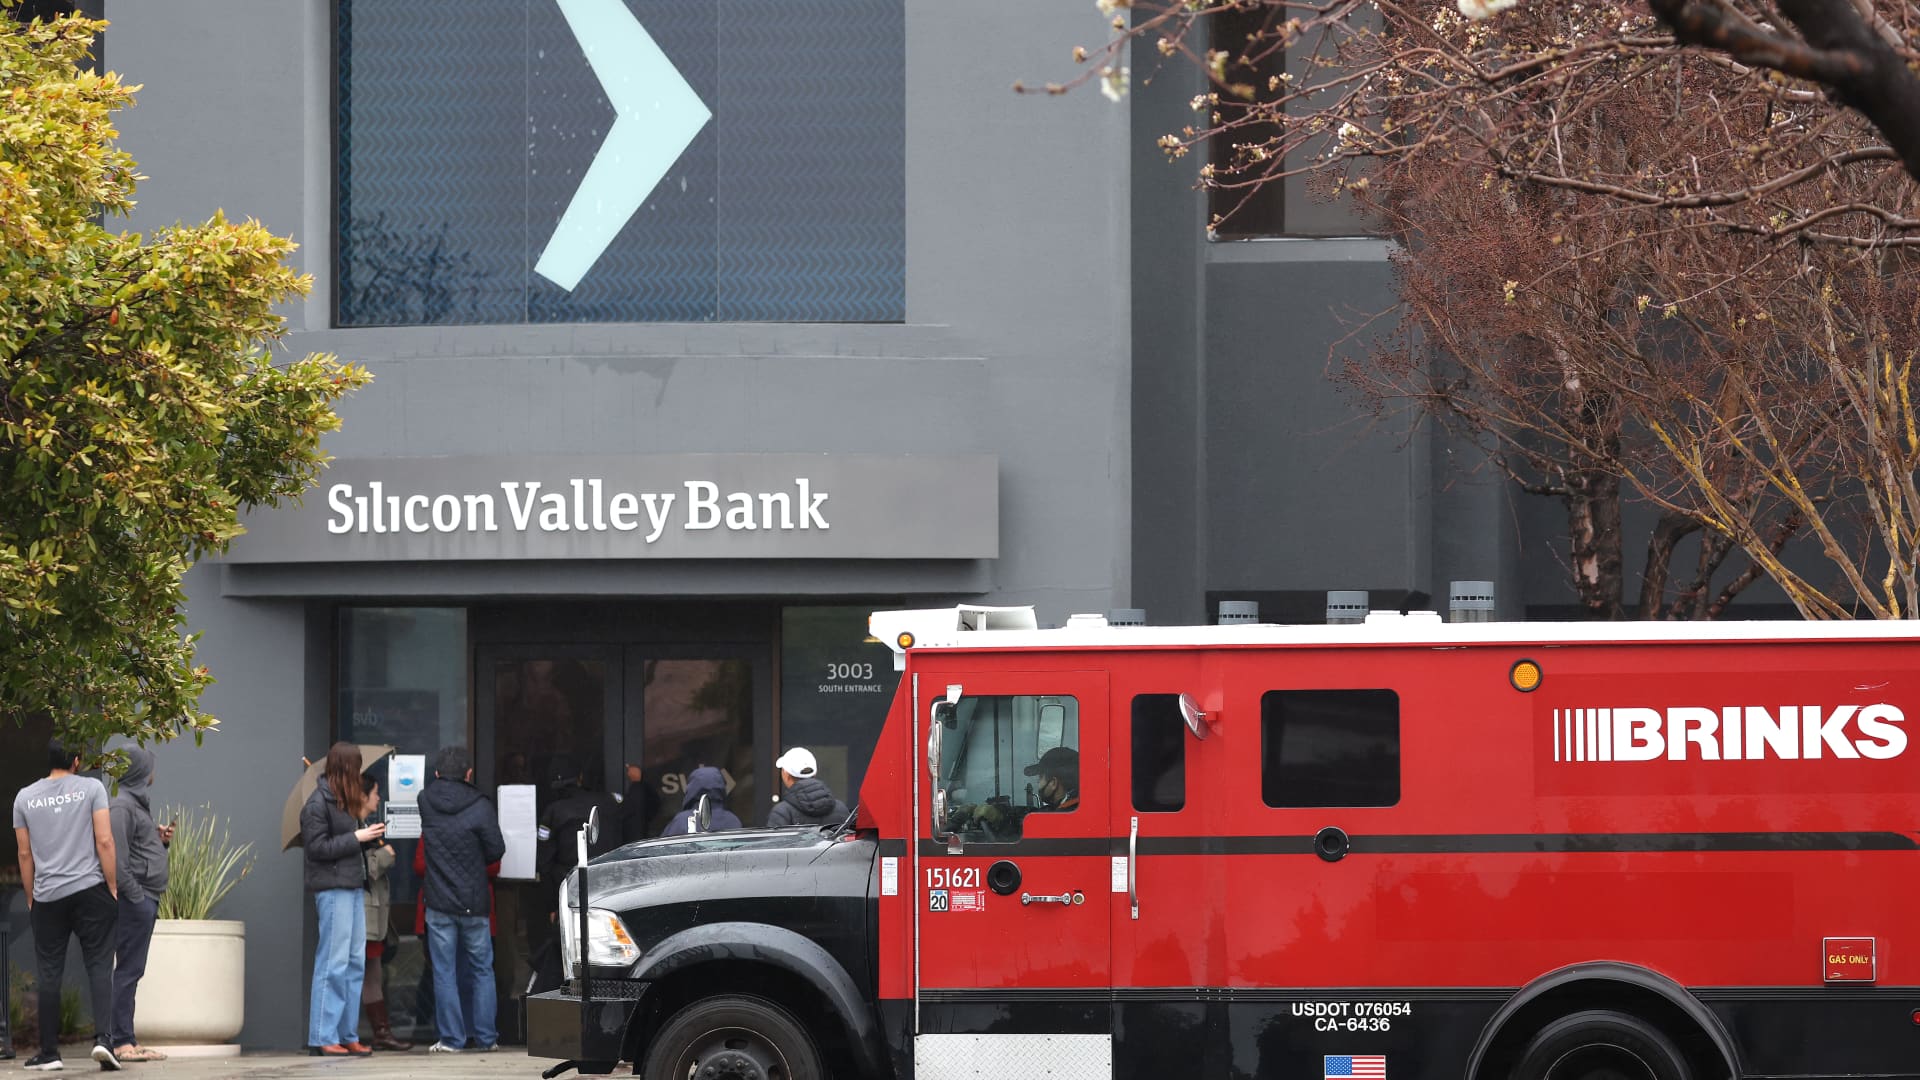 Founders swarmed SVB’s Bay Area branches looking for answers after bank's historic failure